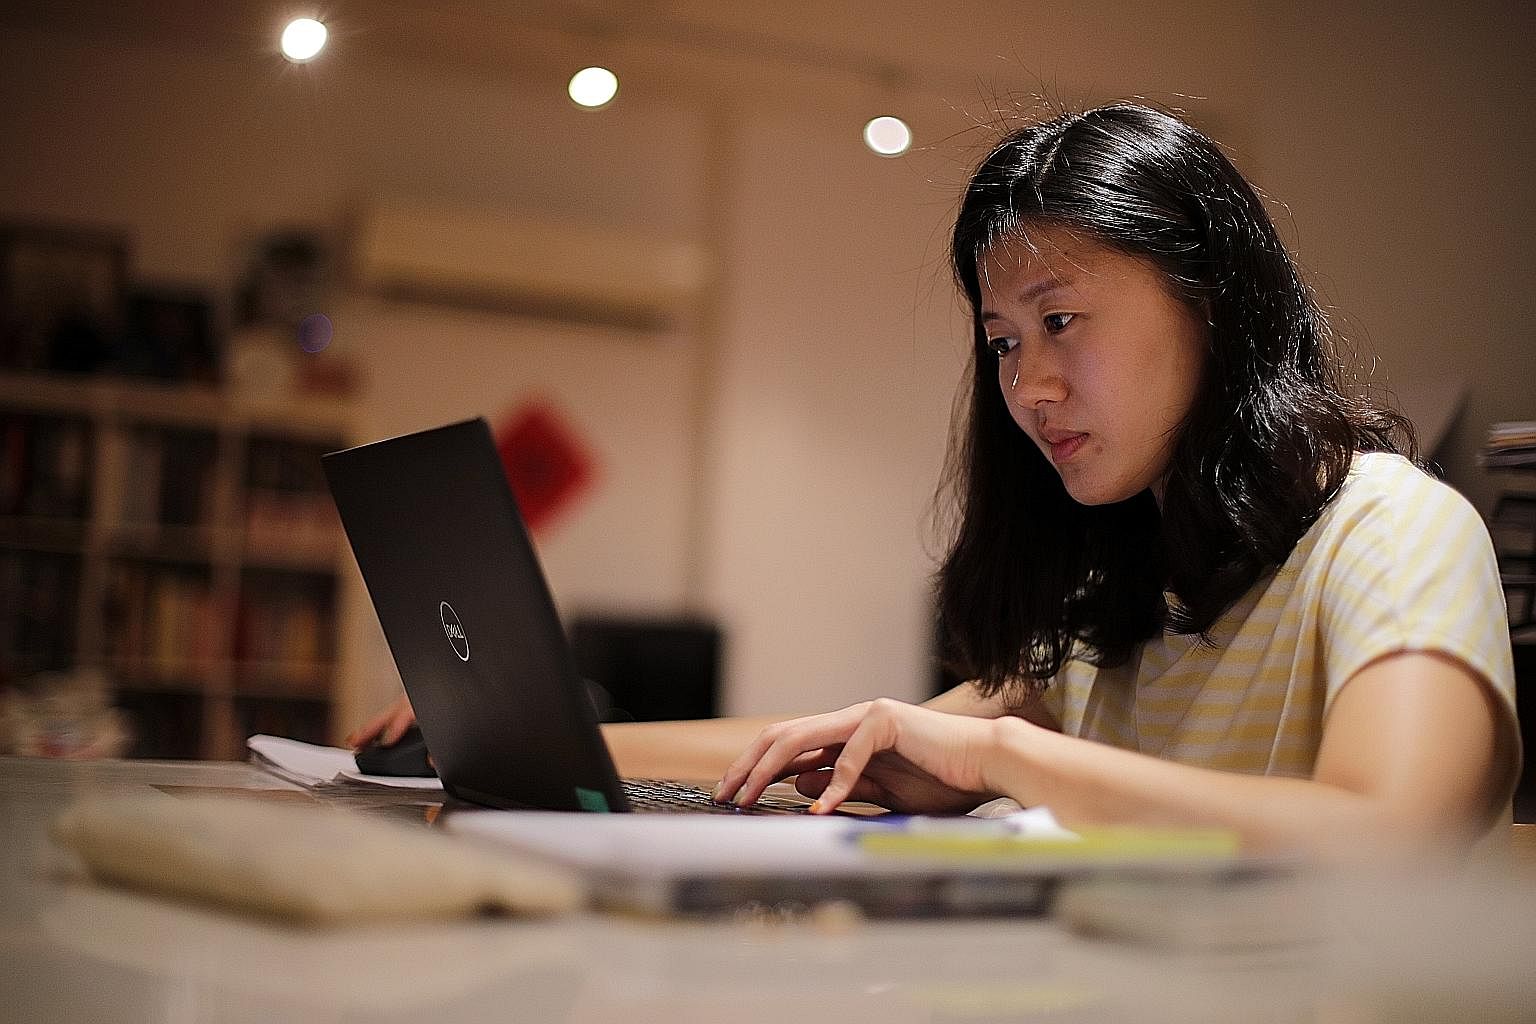 Auditor Tee Yi Ti, 29, working from home under the circuit breaker measures to stop the spread of Covid-19 in Singapore. Post-Covid-19, one major trend that will emerge is the growing shift towards remote deployment. In short, work-from-home could be